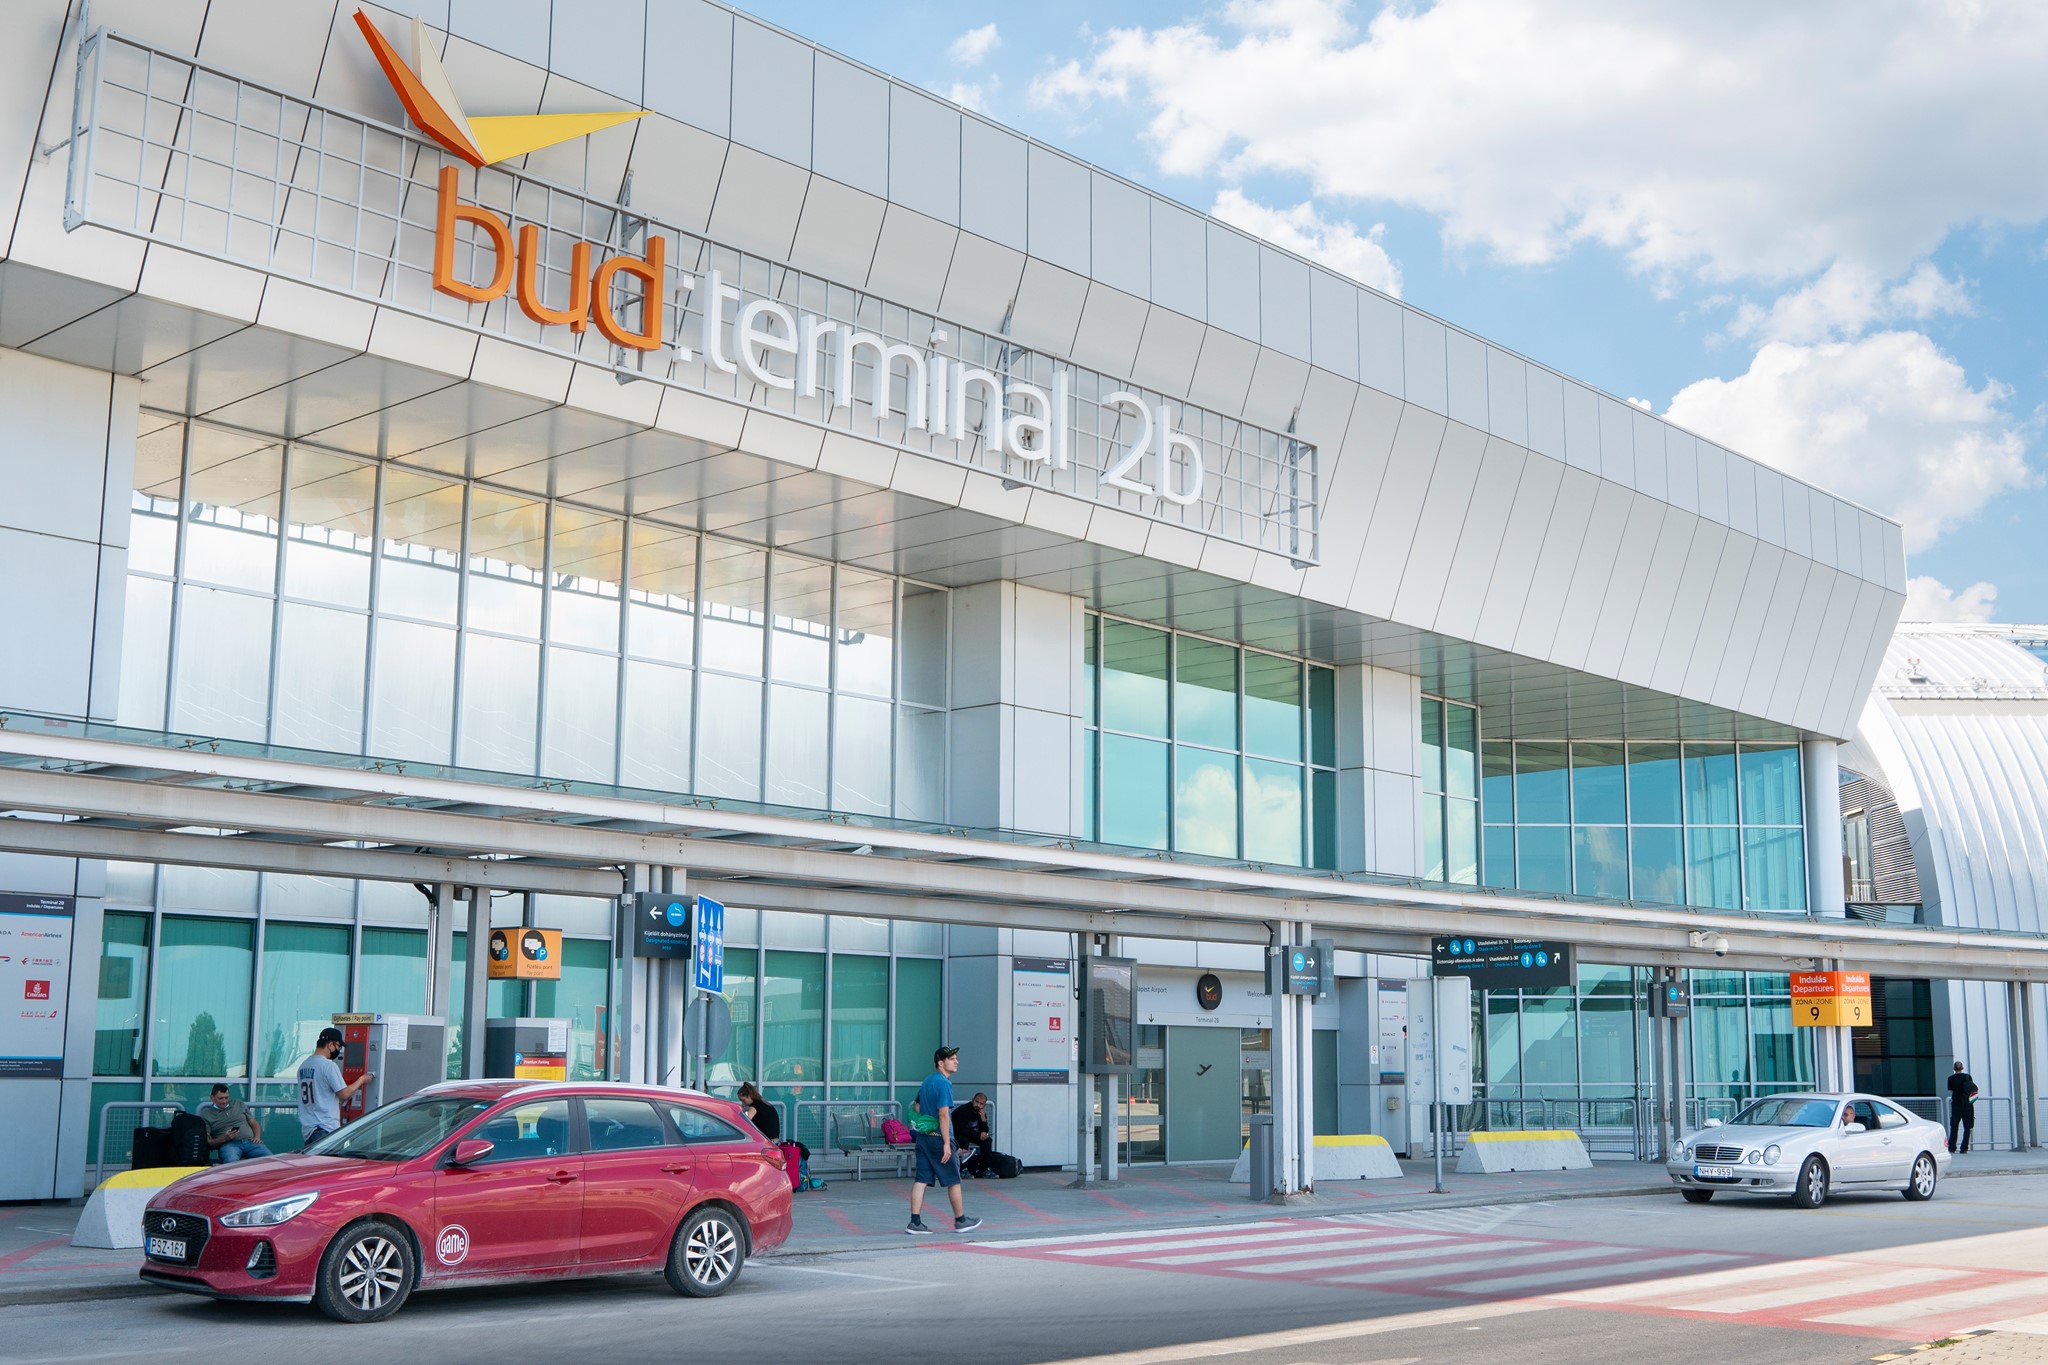 Updated: Repurchase Of Budapest Airport in Final Phase, Says Ministry